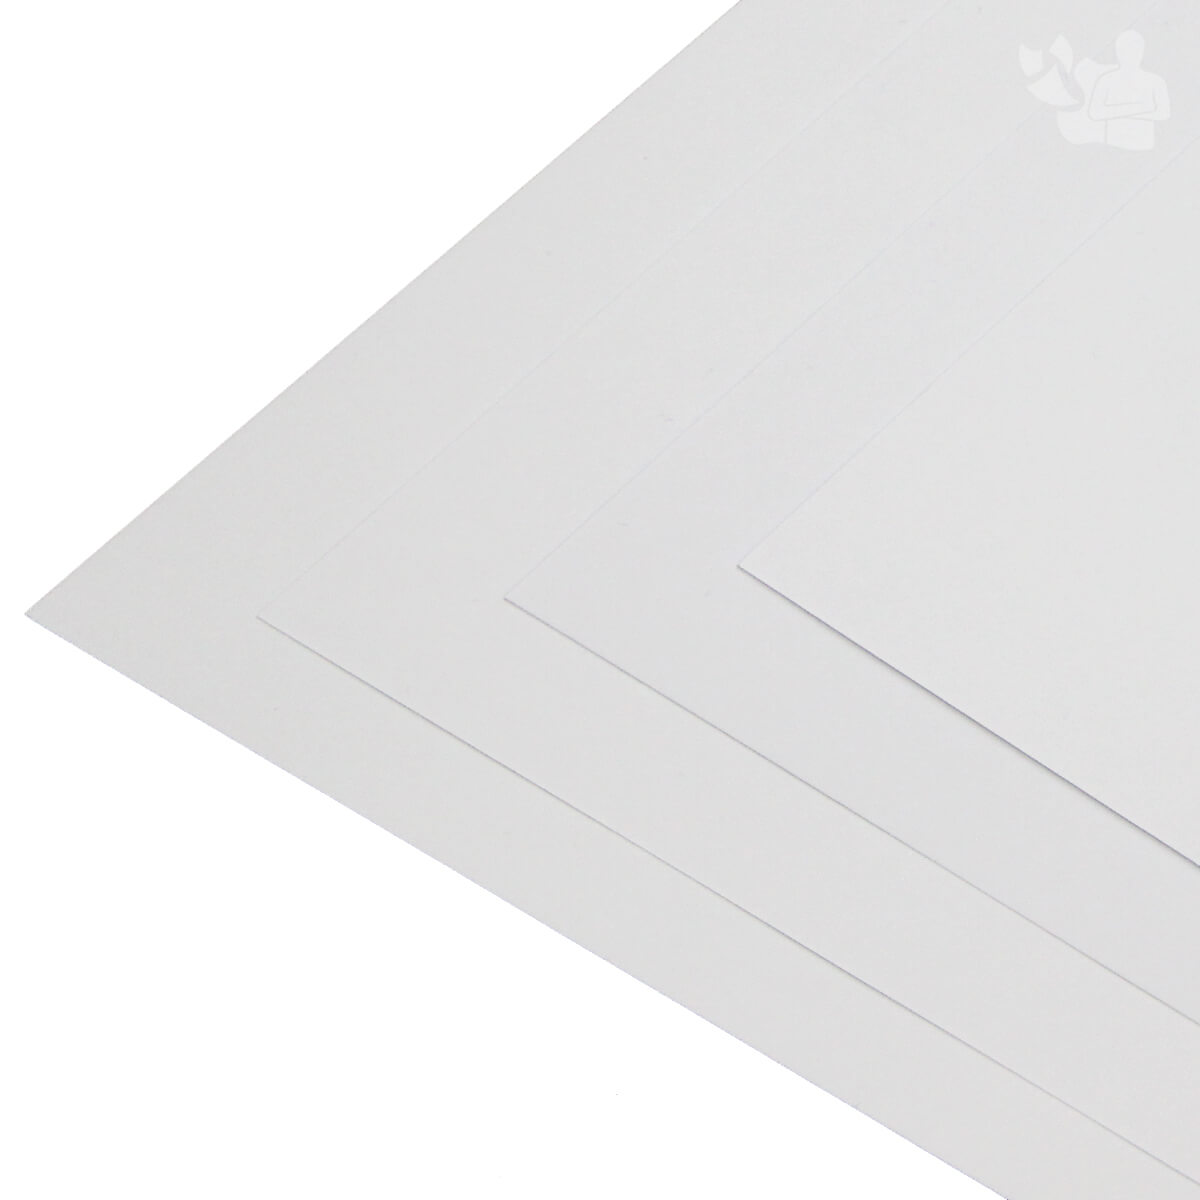 Papel Offset Suzano 240g Supperpapel 9 Anos 7344